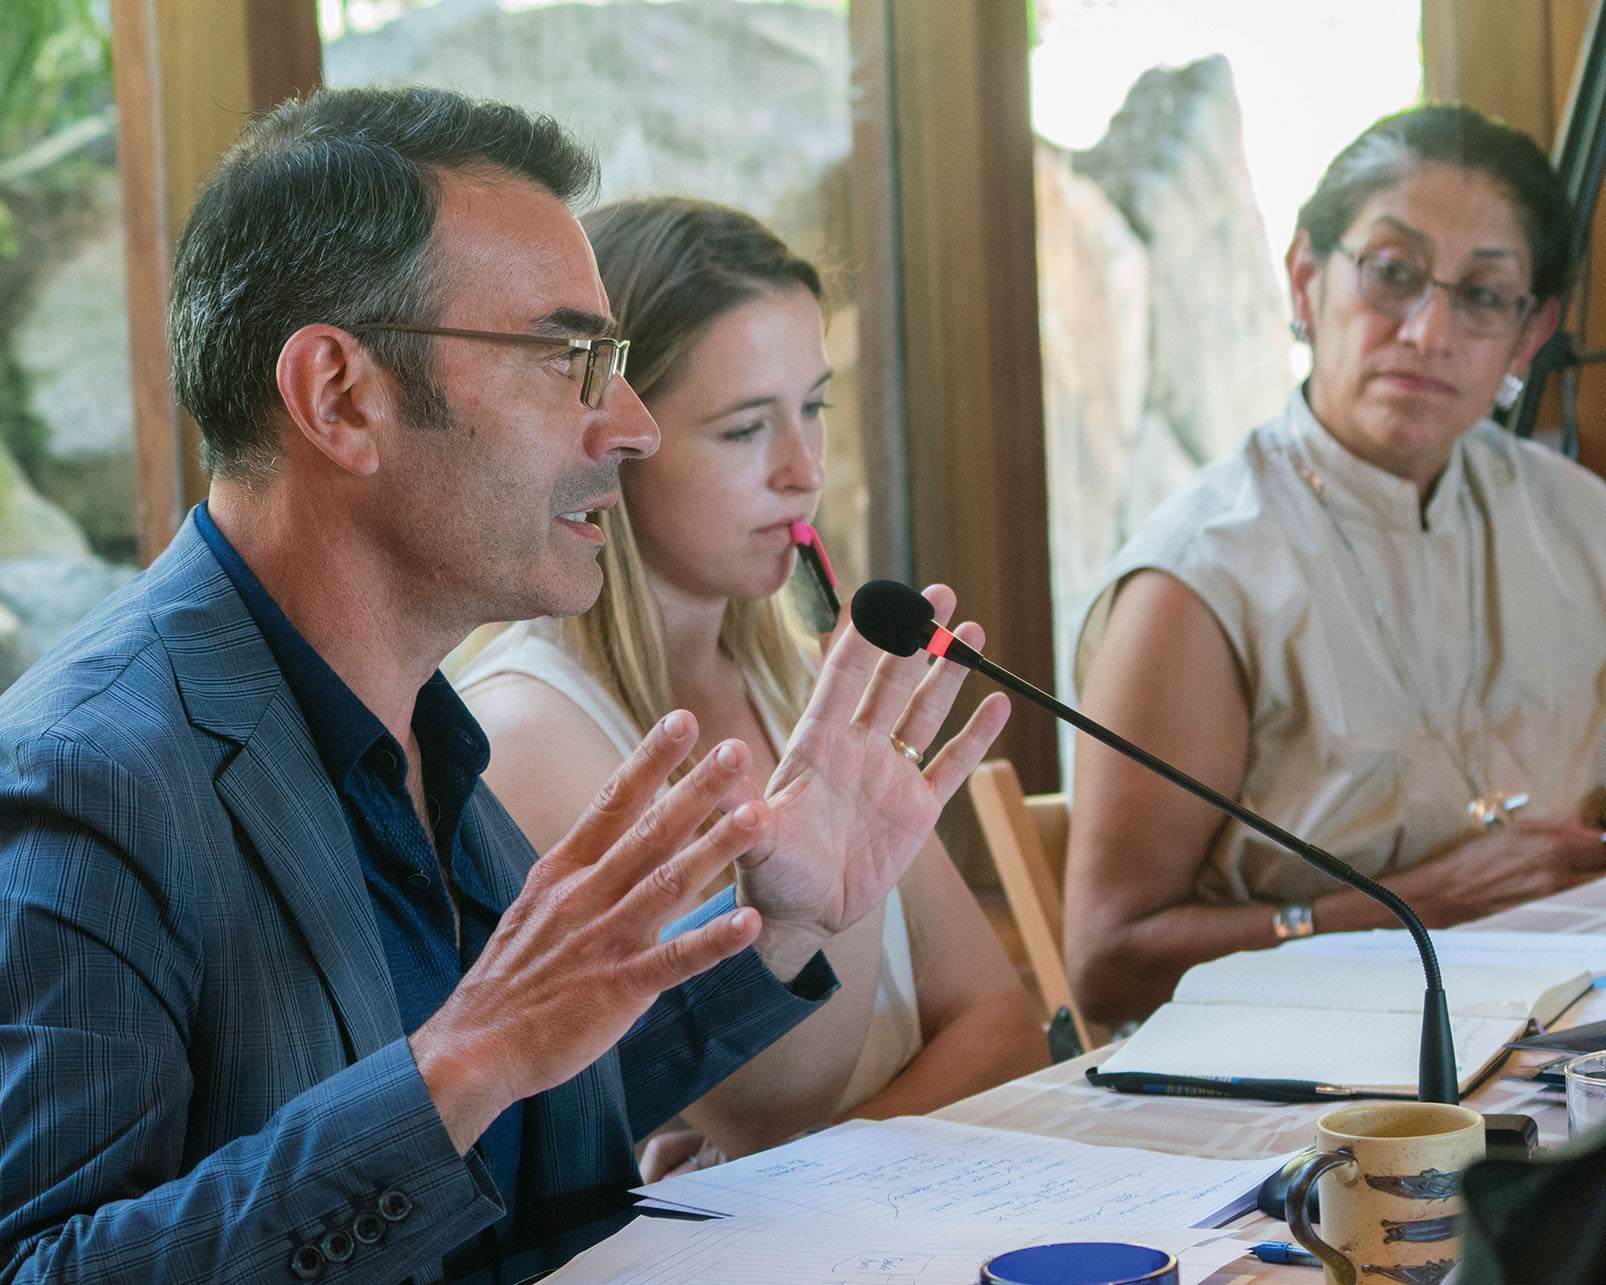 James Cavallaro describes investigating the Iguala disappearances; to his right are Stephanie Leutert and Maria Echaveste. (Photo by Jim Block.)